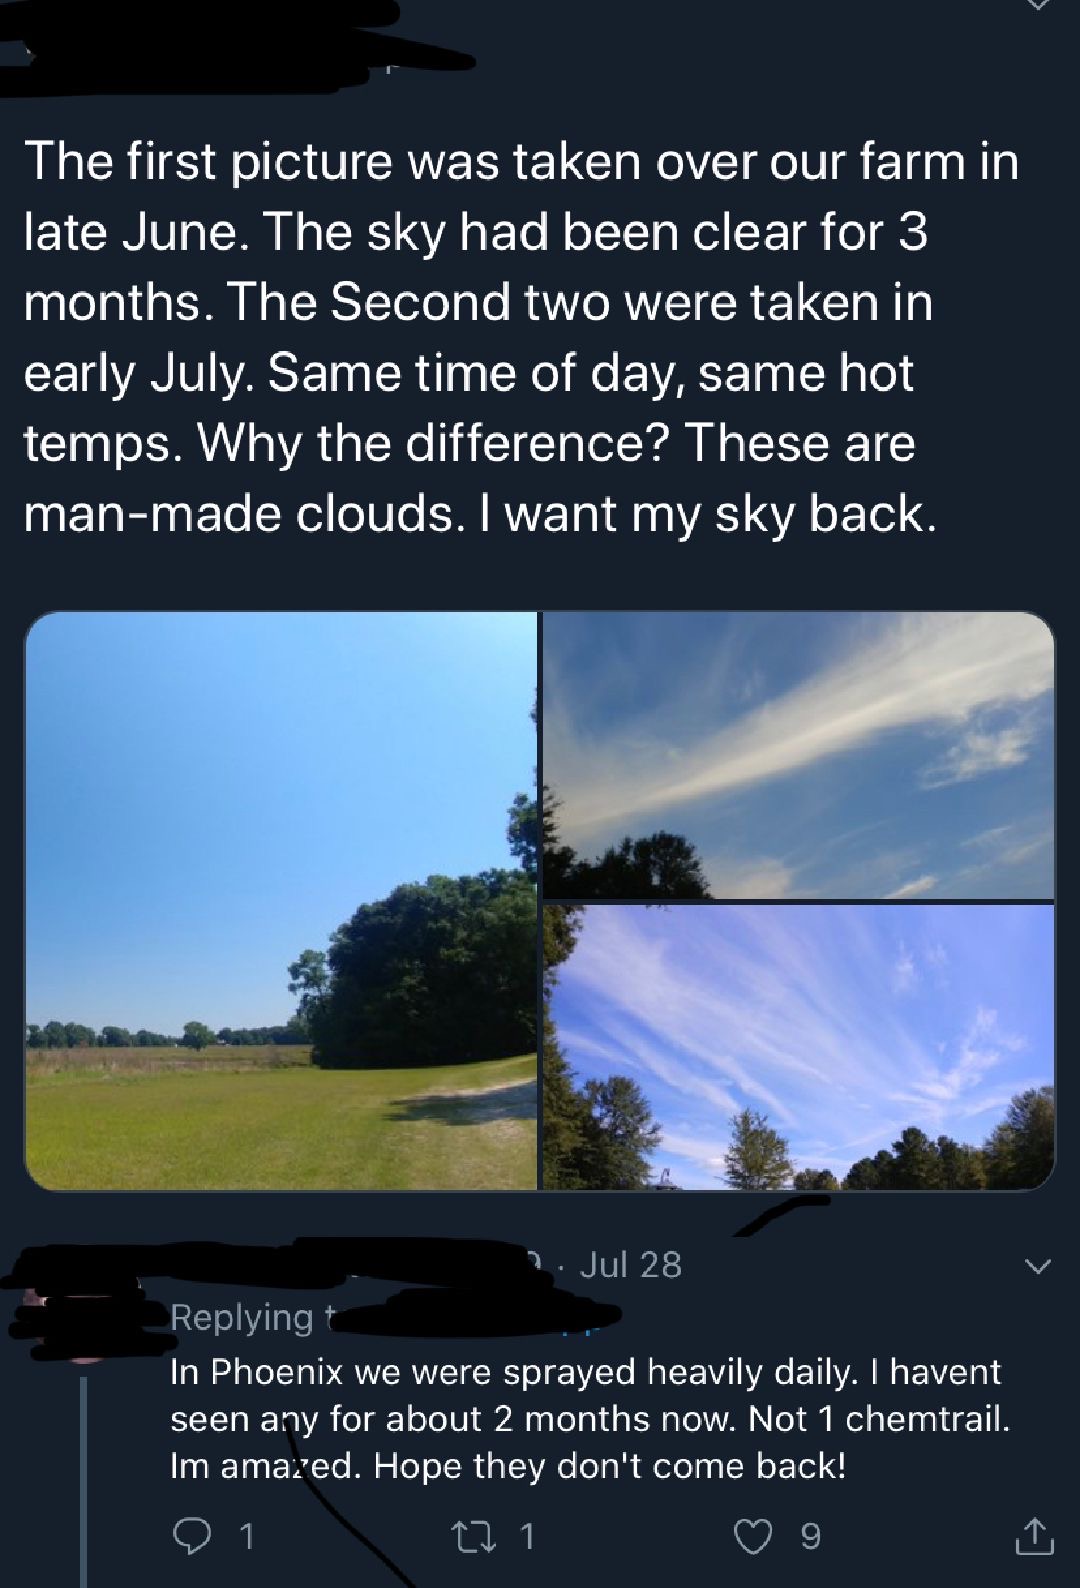 The first picture was taken over our farm in late June. The sky had been clear for 3 months. The Second two were taken in early July. Same time of day, same hot temps. Why the difference? These are manmade clouds. I want my sky back. 2. Jul 28 ing In…